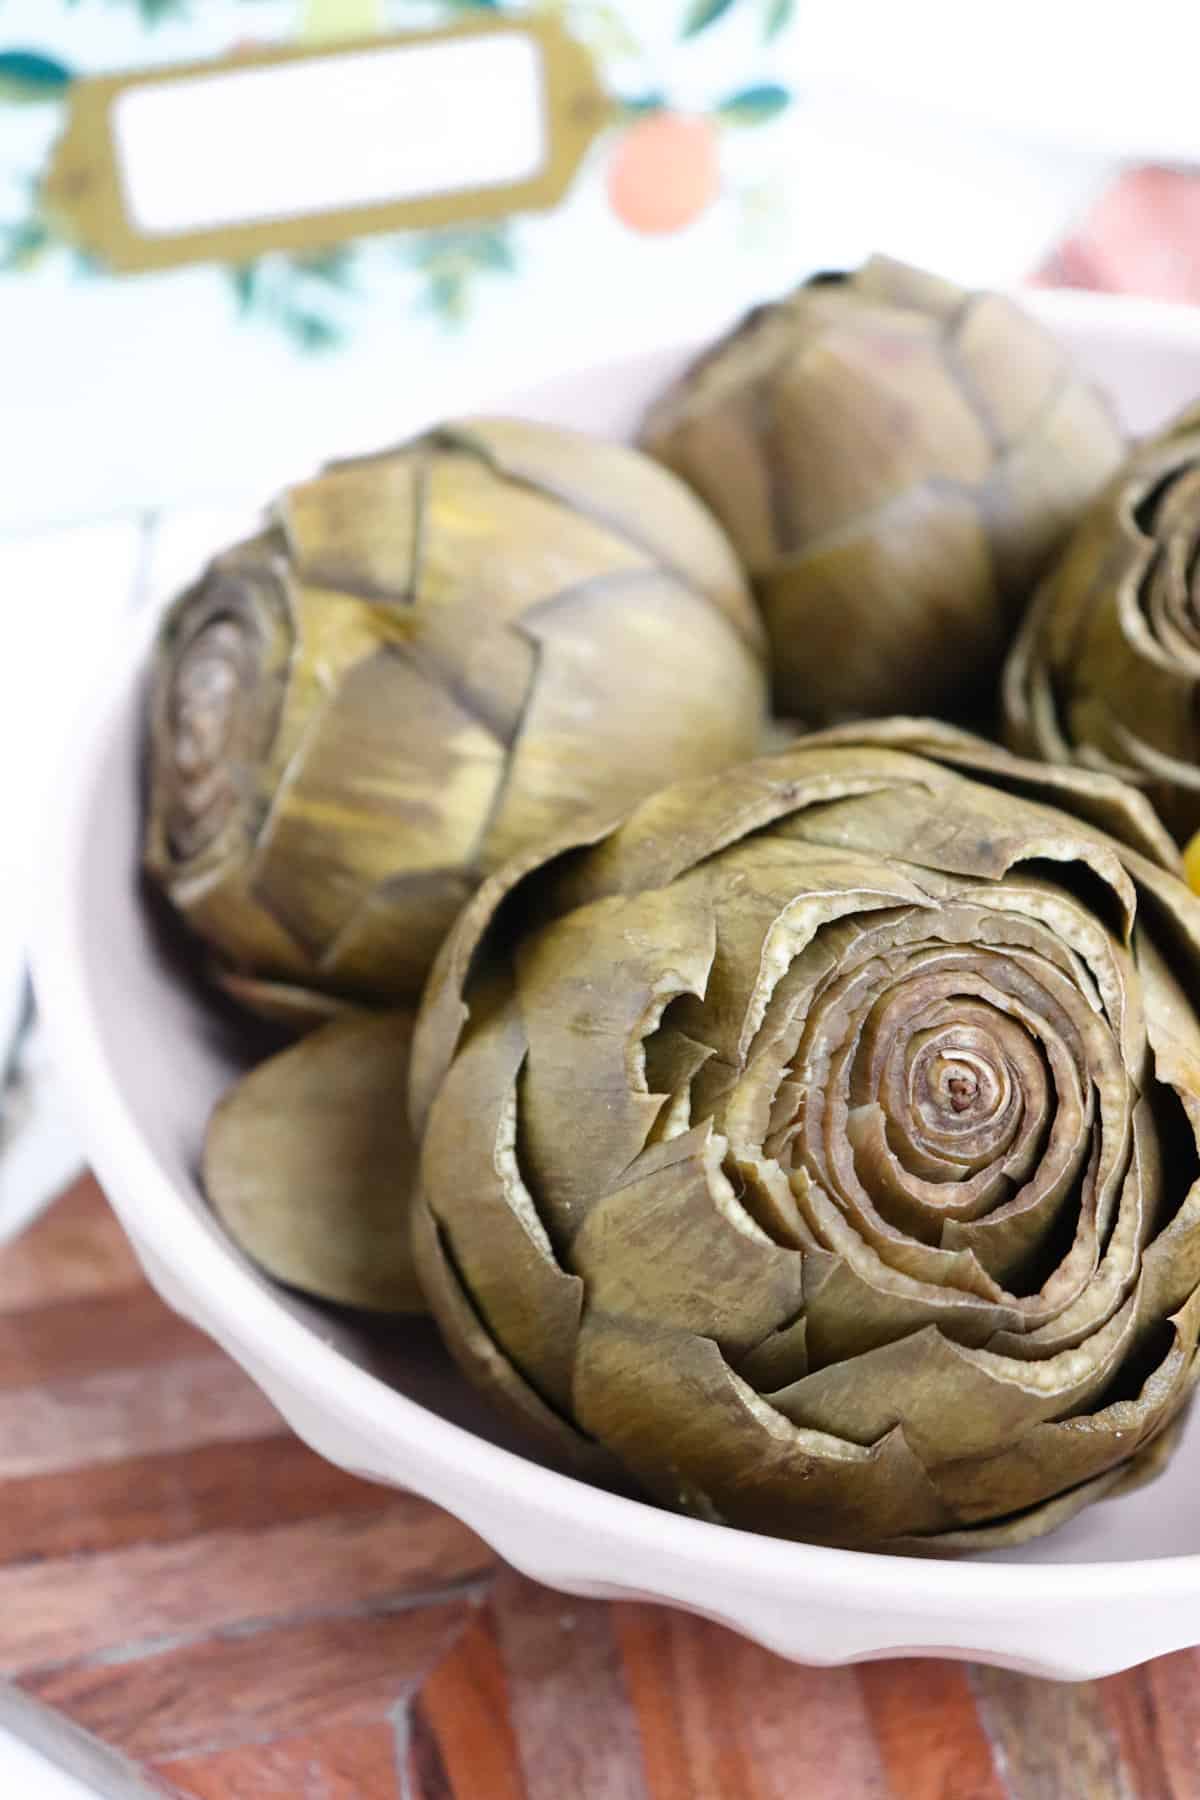 up close of cooked artichokes.